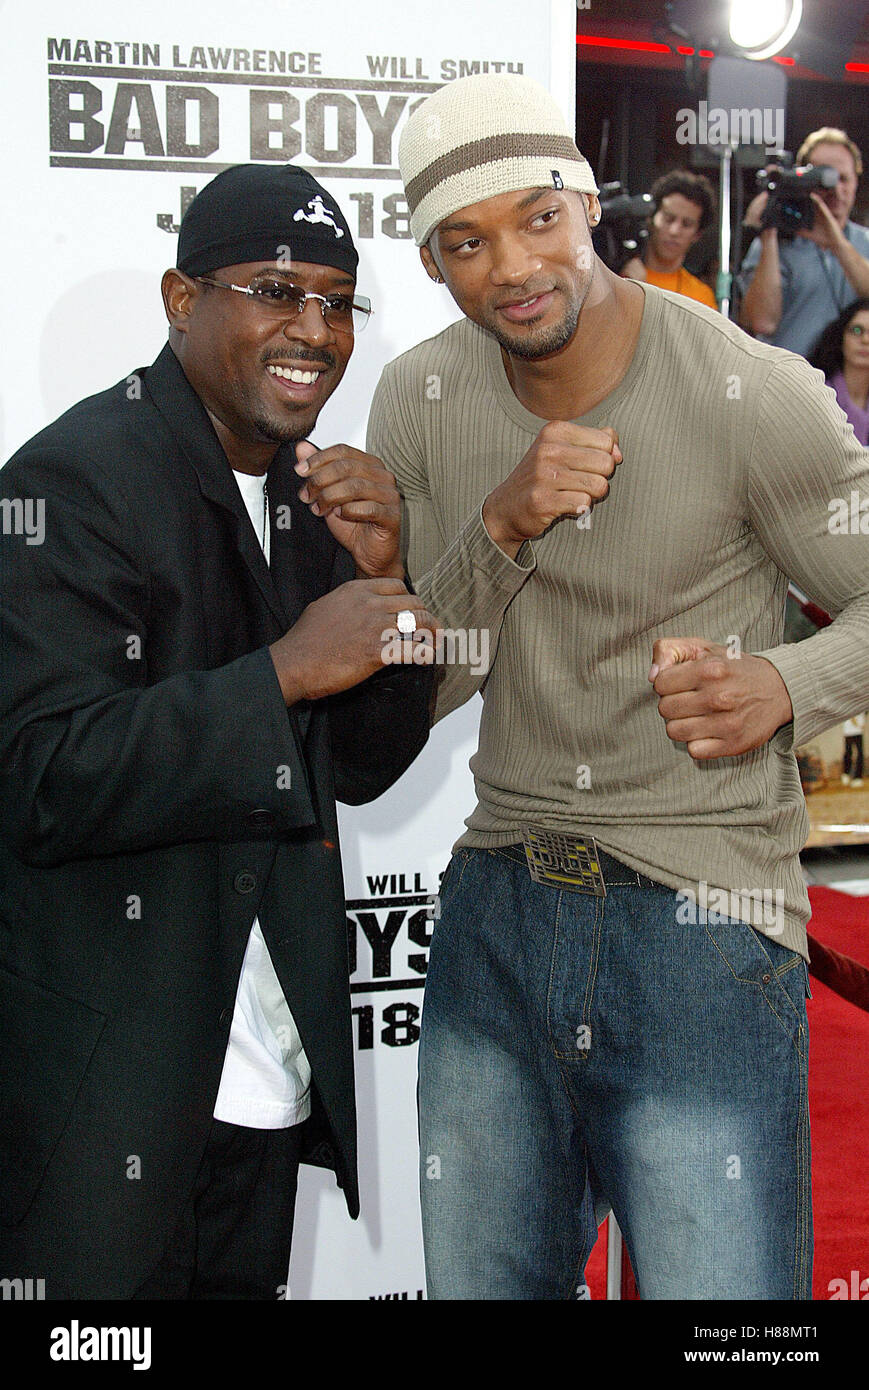 MARTIN LAWRENCE & WILL SMITH BAD BOYS 2 WORLD PREMIERE MANN THEATRES WESTWOOD LOS ANGELES USA 09 July 2003 Stock Photo